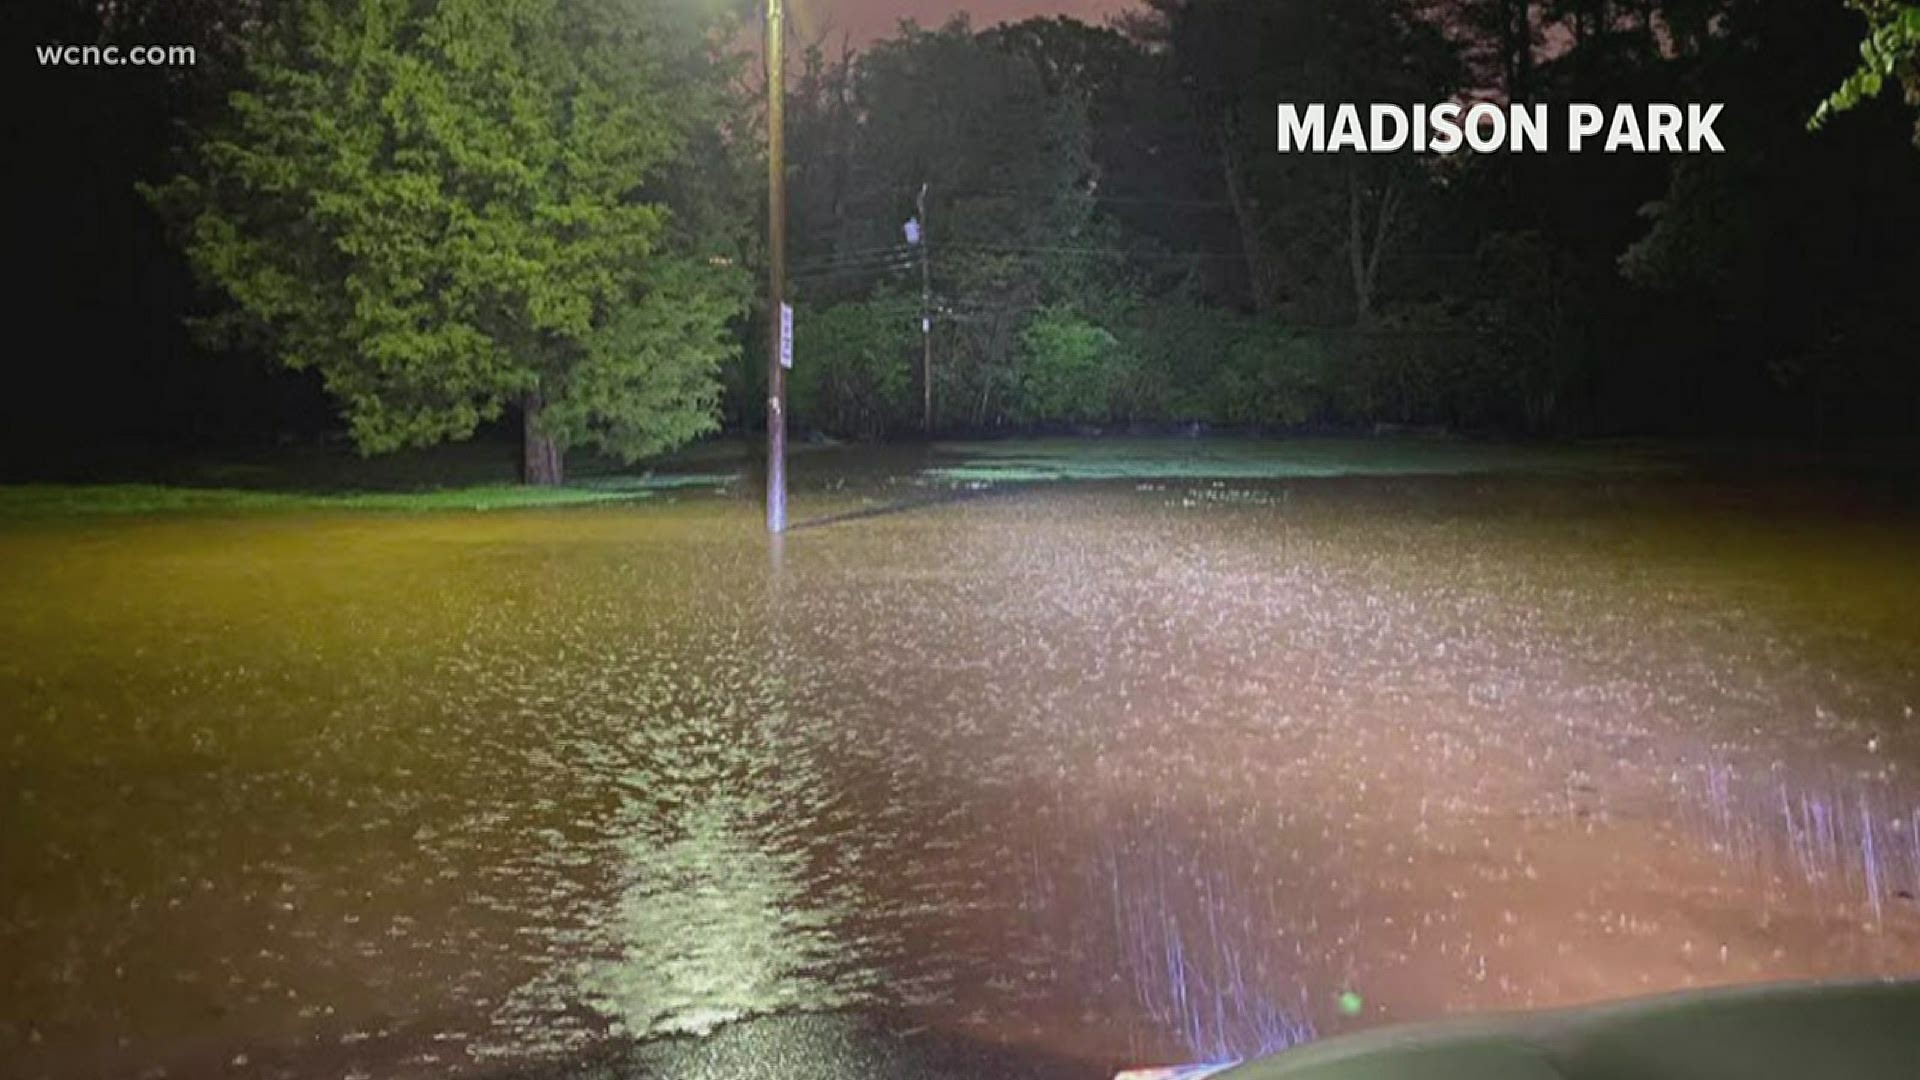 A line of strong storms brought heavy rain and winds to the Charlotte area overnight, leading to flooding in certain areas.